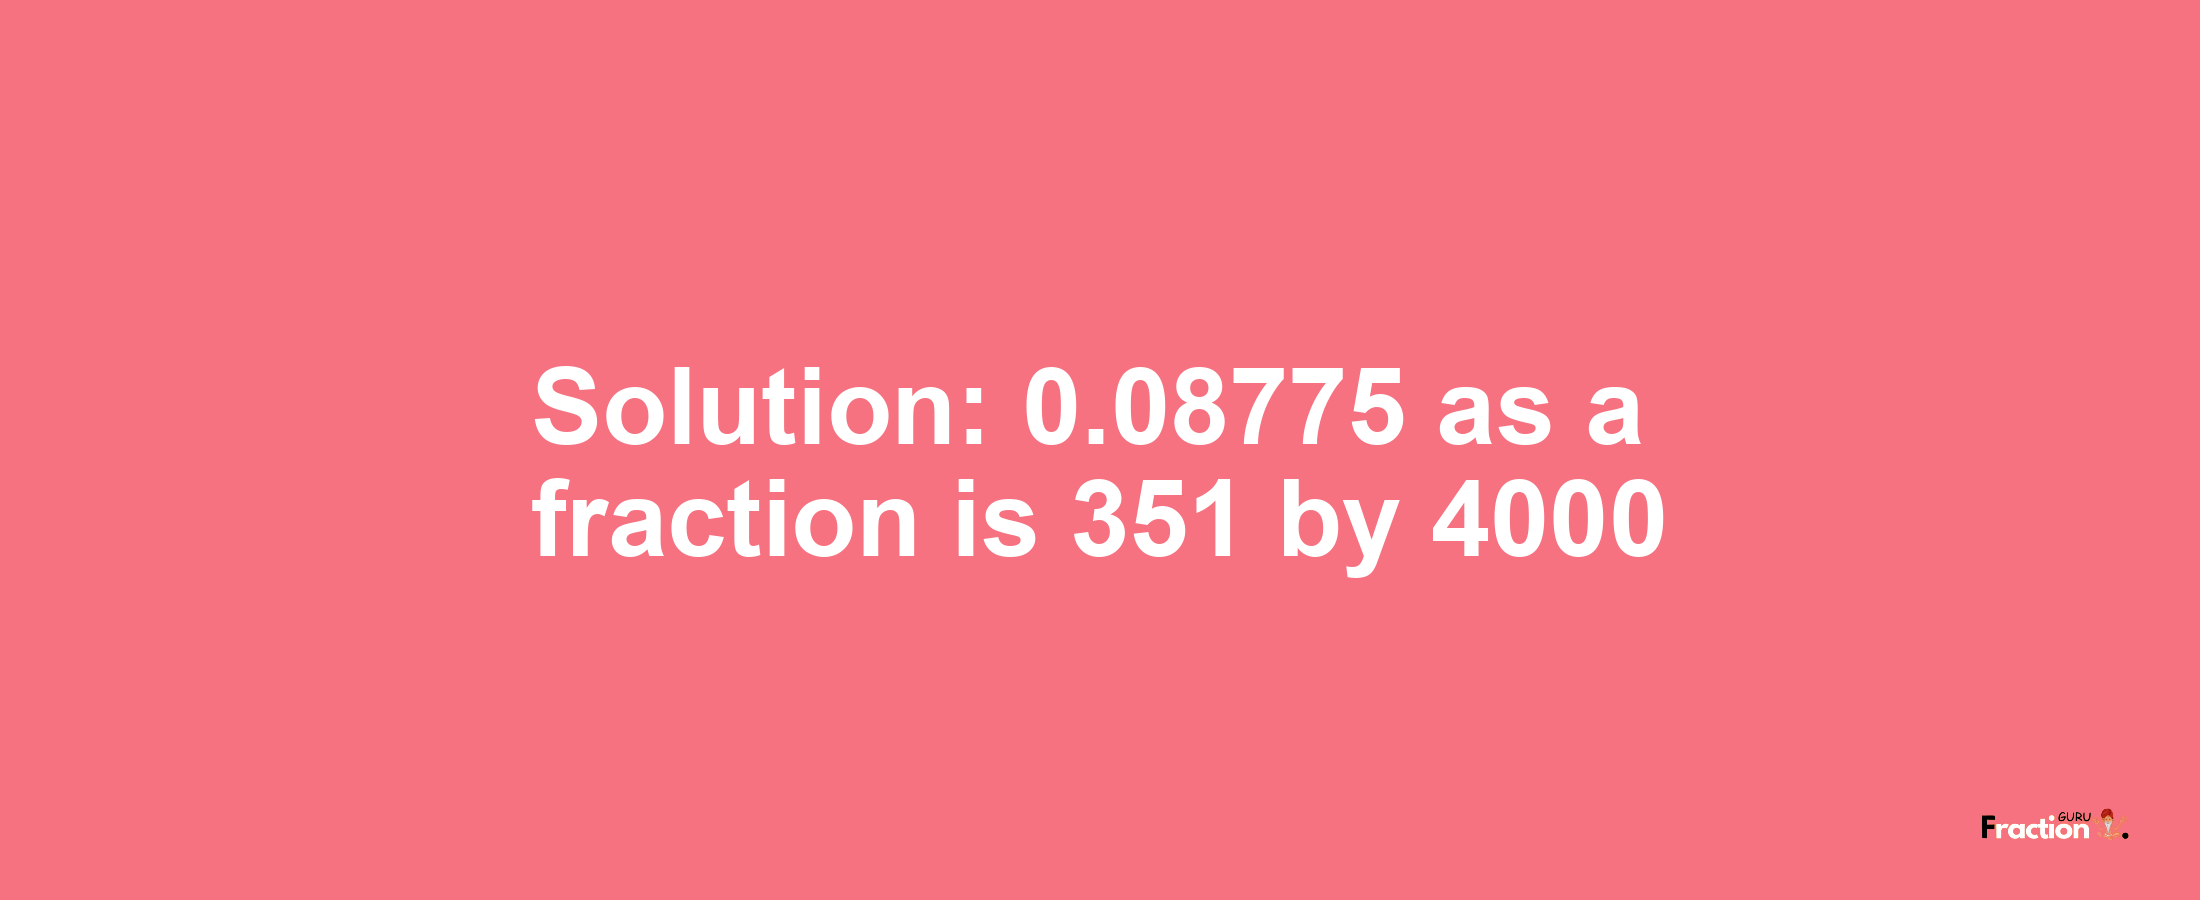 Solution:0.08775 as a fraction is 351/4000